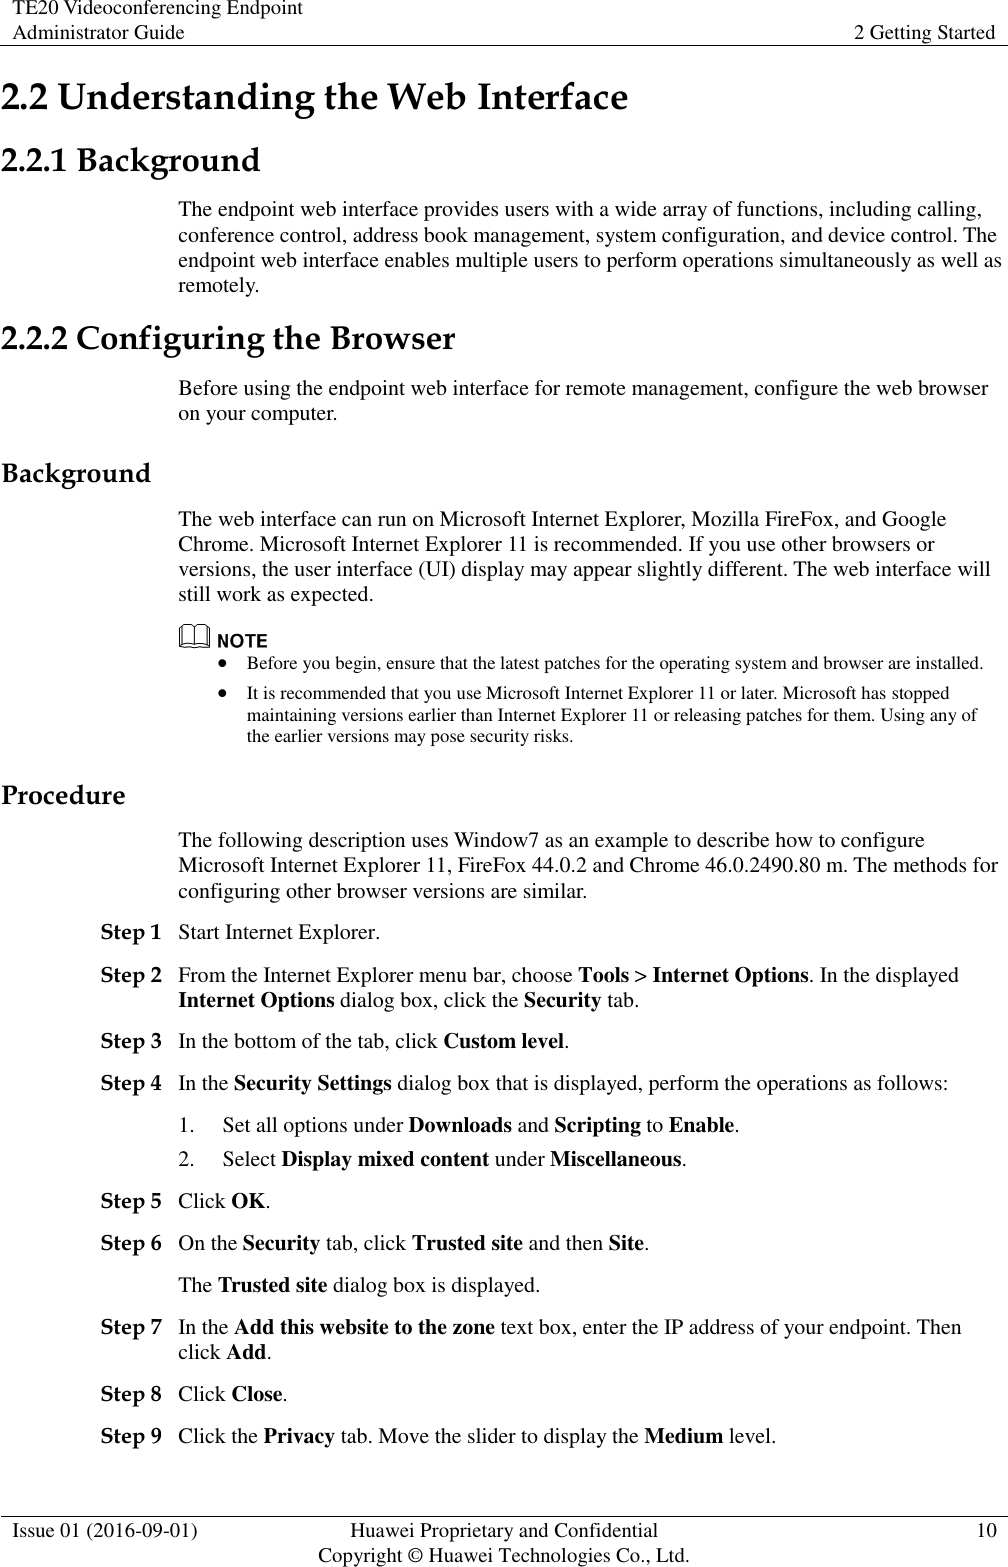 TE20 Videoconferencing Endpoint Administrator Guide 2 Getting Started  Issue 01 (2016-09-01) Huawei Proprietary and Confidential                                     Copyright © Huawei Technologies Co., Ltd. 10  2.2 Understanding the Web Interface 2.2.1 Background The endpoint web interface provides users with a wide array of functions, including calling, conference control, address book management, system configuration, and device control. The endpoint web interface enables multiple users to perform operations simultaneously as well as remotely. 2.2.2 Configuring the Browser Before using the endpoint web interface for remote management, configure the web browser on your computer. Background The web interface can run on Microsoft Internet Explorer, Mozilla FireFox, and Google Chrome. Microsoft Internet Explorer 11 is recommended. If you use other browsers or versions, the user interface (UI) display may appear slightly different. The web interface will still work as expected.   Before you begin, ensure that the latest patches for the operating system and browser are installed.  It is recommended that you use Microsoft Internet Explorer 11 or later. Microsoft has stopped maintaining versions earlier than Internet Explorer 11 or releasing patches for them. Using any of the earlier versions may pose security risks. Procedure The following description uses Window7 as an example to describe how to configure Microsoft Internet Explorer 11, FireFox 44.0.2 and Chrome 46.0.2490.80 m. The methods for configuring other browser versions are similar. Step 1 Start Internet Explorer. Step 2 From the Internet Explorer menu bar, choose Tools &gt; Internet Options. In the displayed Internet Options dialog box, click the Security tab. Step 3 In the bottom of the tab, click Custom level.   Step 4 In the Security Settings dialog box that is displayed, perform the operations as follows:   1. Set all options under Downloads and Scripting to Enable. 2. Select Display mixed content under Miscellaneous. Step 5 Click OK. Step 6 On the Security tab, click Trusted site and then Site. The Trusted site dialog box is displayed. Step 7 In the Add this website to the zone text box, enter the IP address of your endpoint. Then click Add. Step 8 Click Close. Step 9 Click the Privacy tab. Move the slider to display the Medium level. 